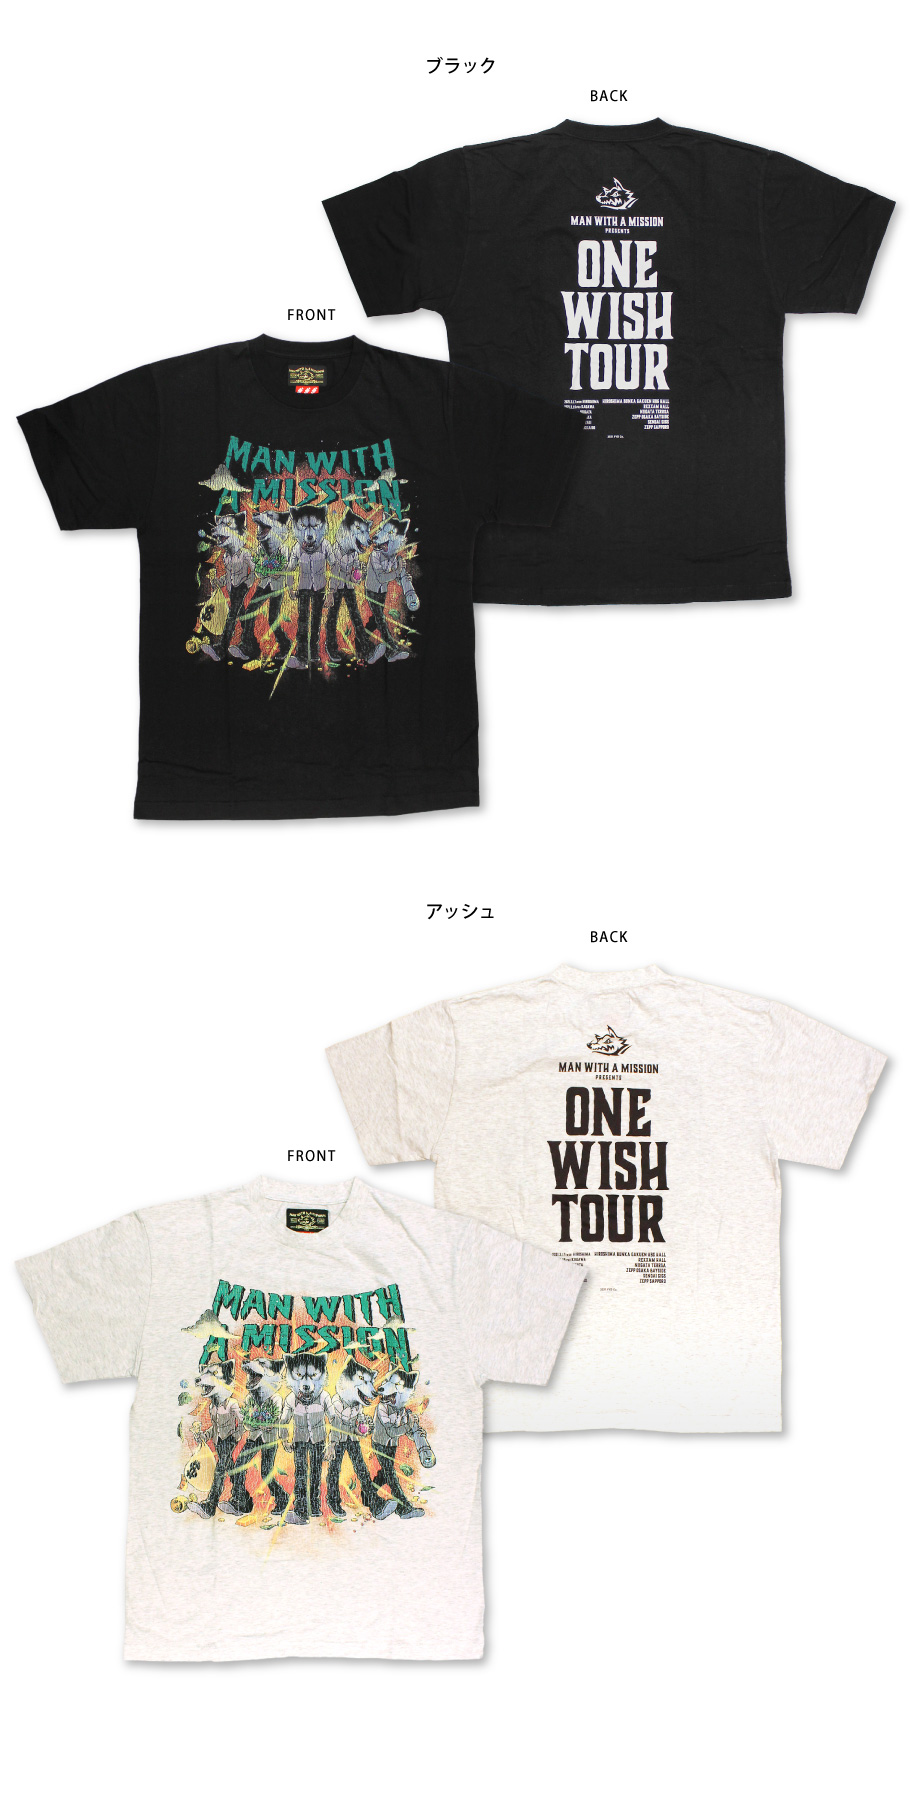 311x MAN WITH A MISSION VIP特典グッズ×コラボTVIP特典グッズ - www ...